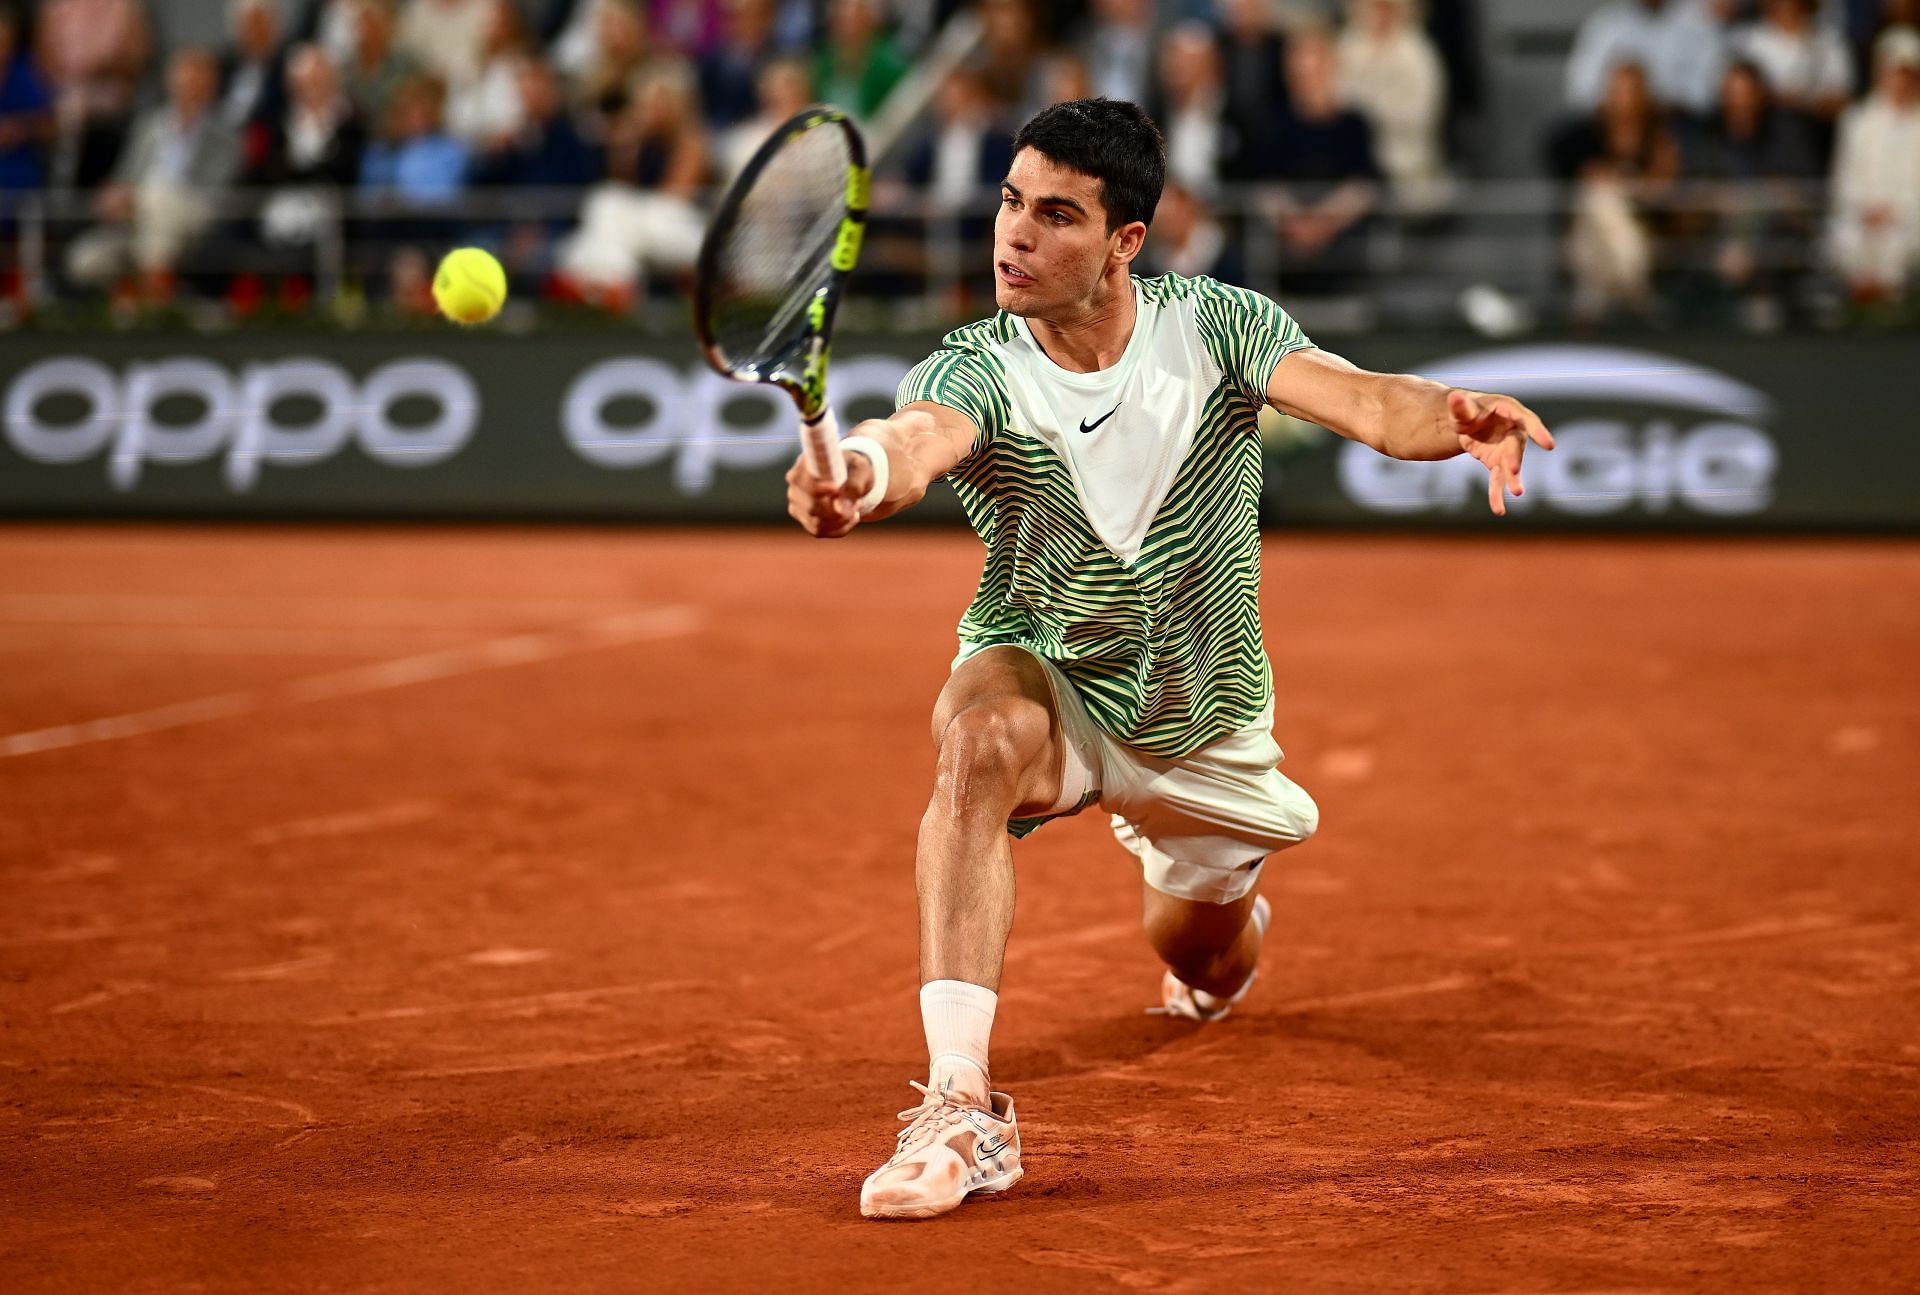 Alcaraz was at his brilliant best in the French Open quarterfinaks